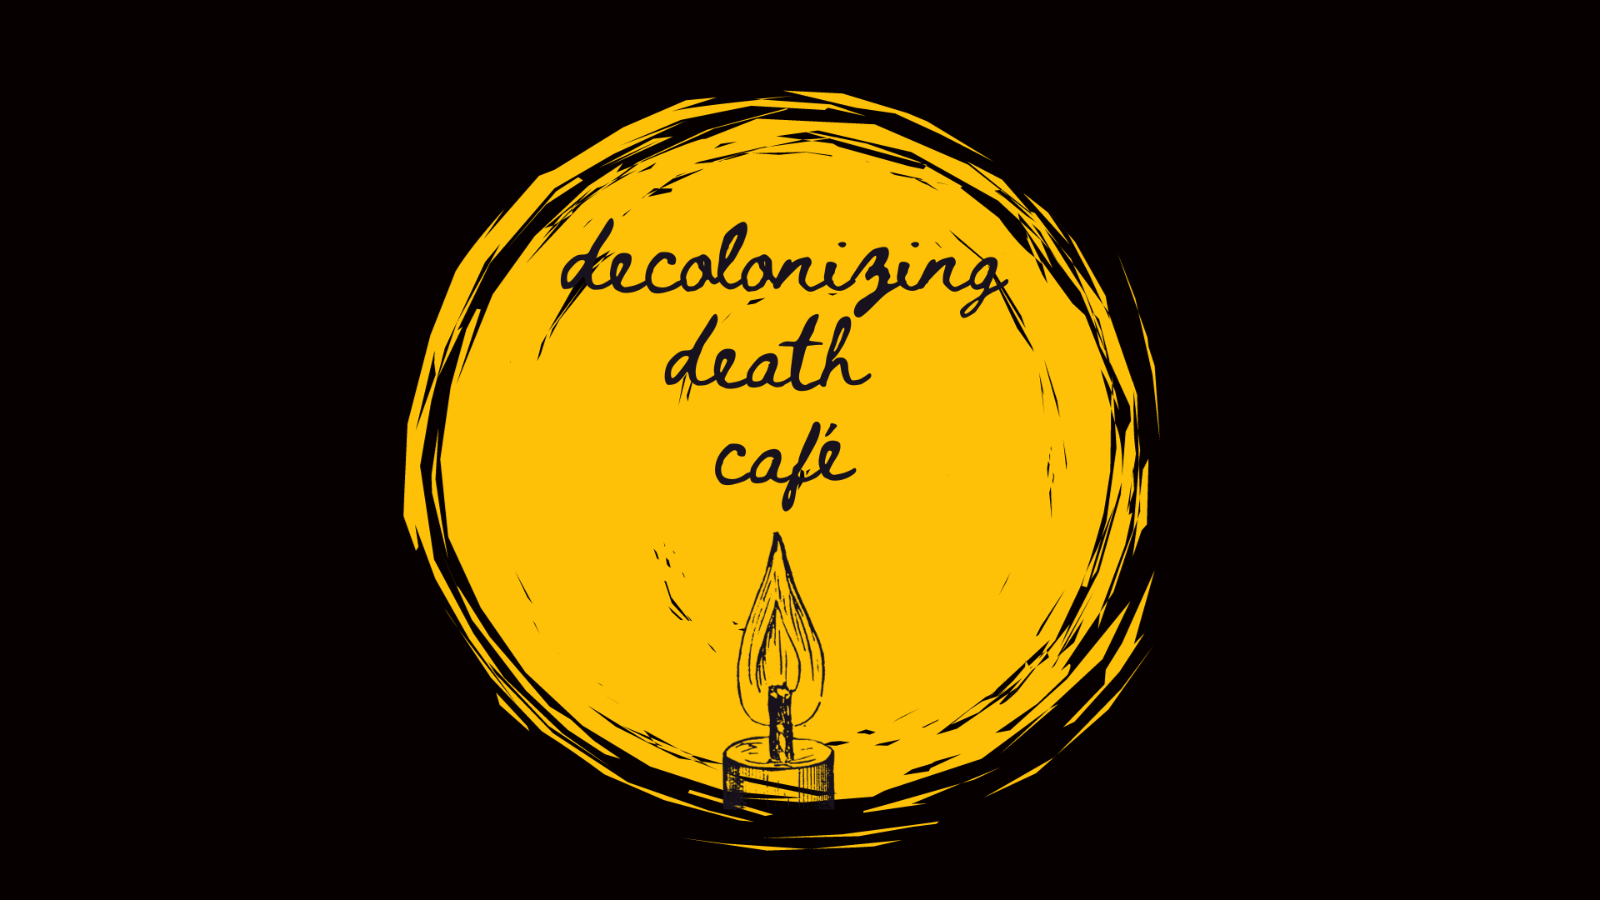 Logo of the Decolonizing Death Cafe featuring a sketch of a candle over a rough yellow circle